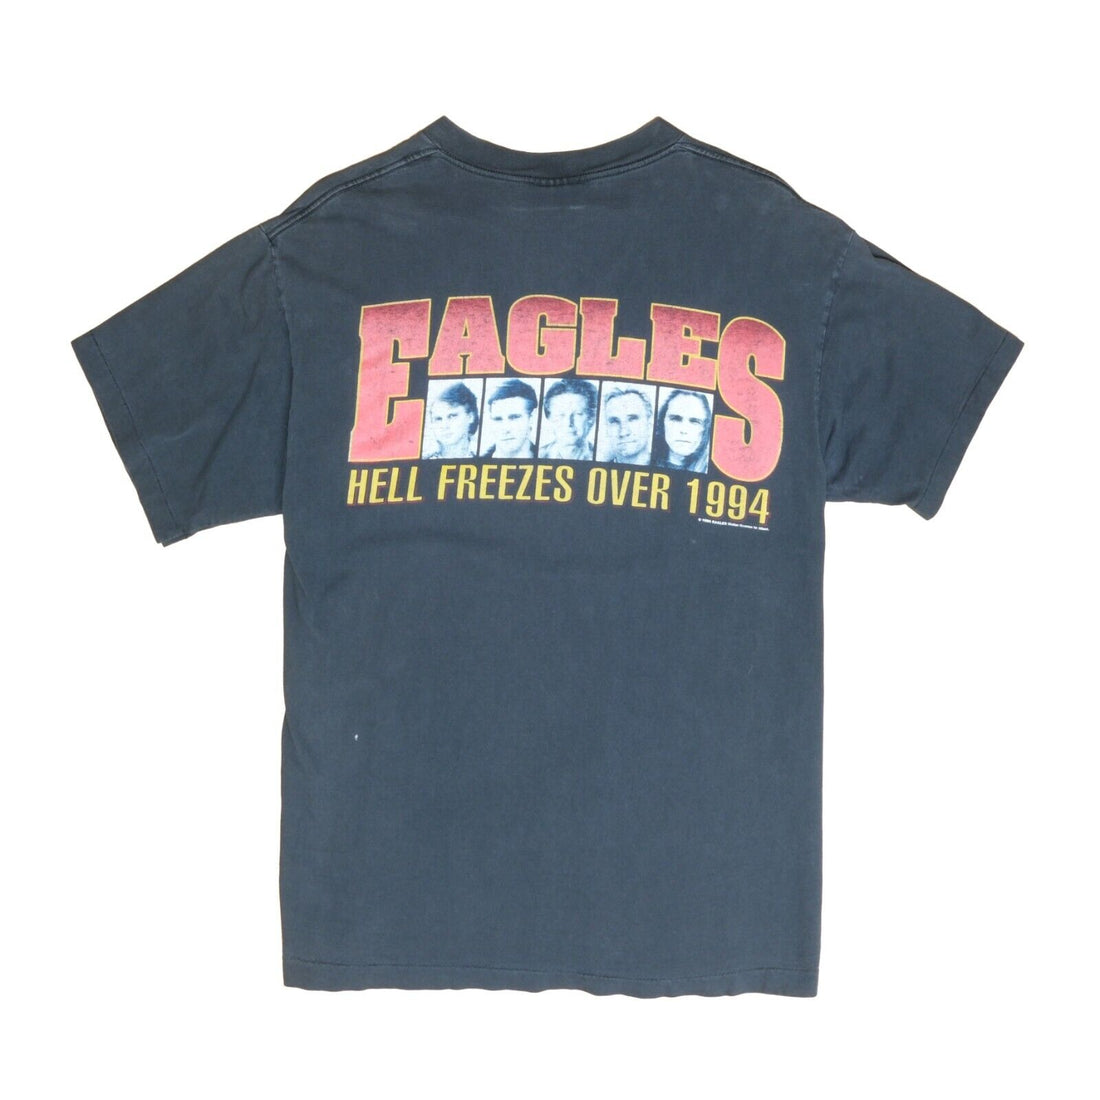 Vintage Eagles Hell Freezes Over Tour Giant T-Shirt Size XL Band Tee 1994 90s